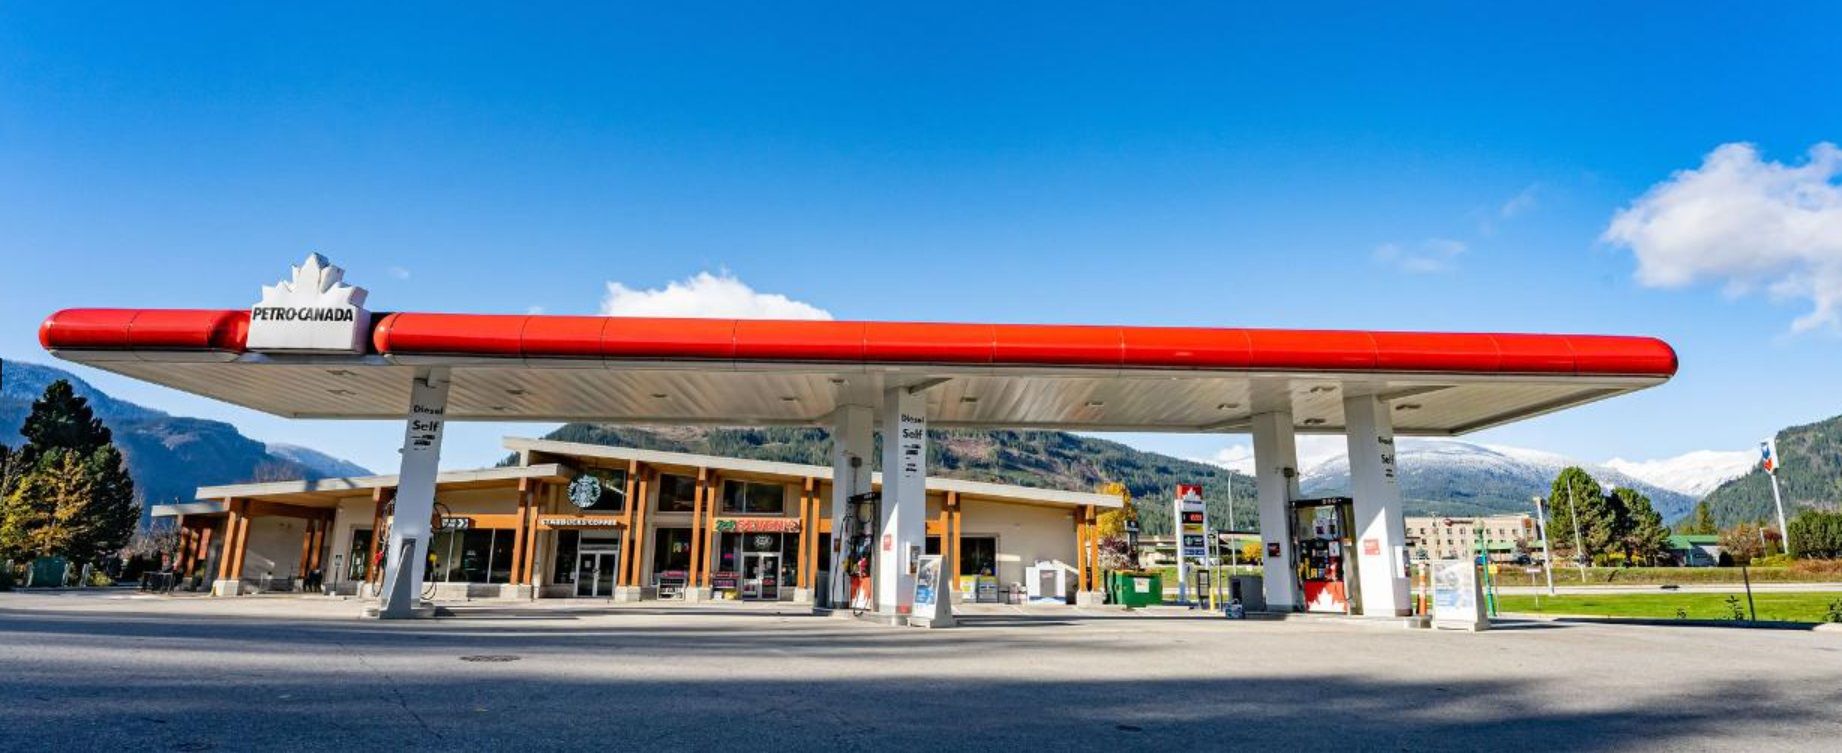 Gas station for sale British Columbia, Petro-Canada for sale British Columbia